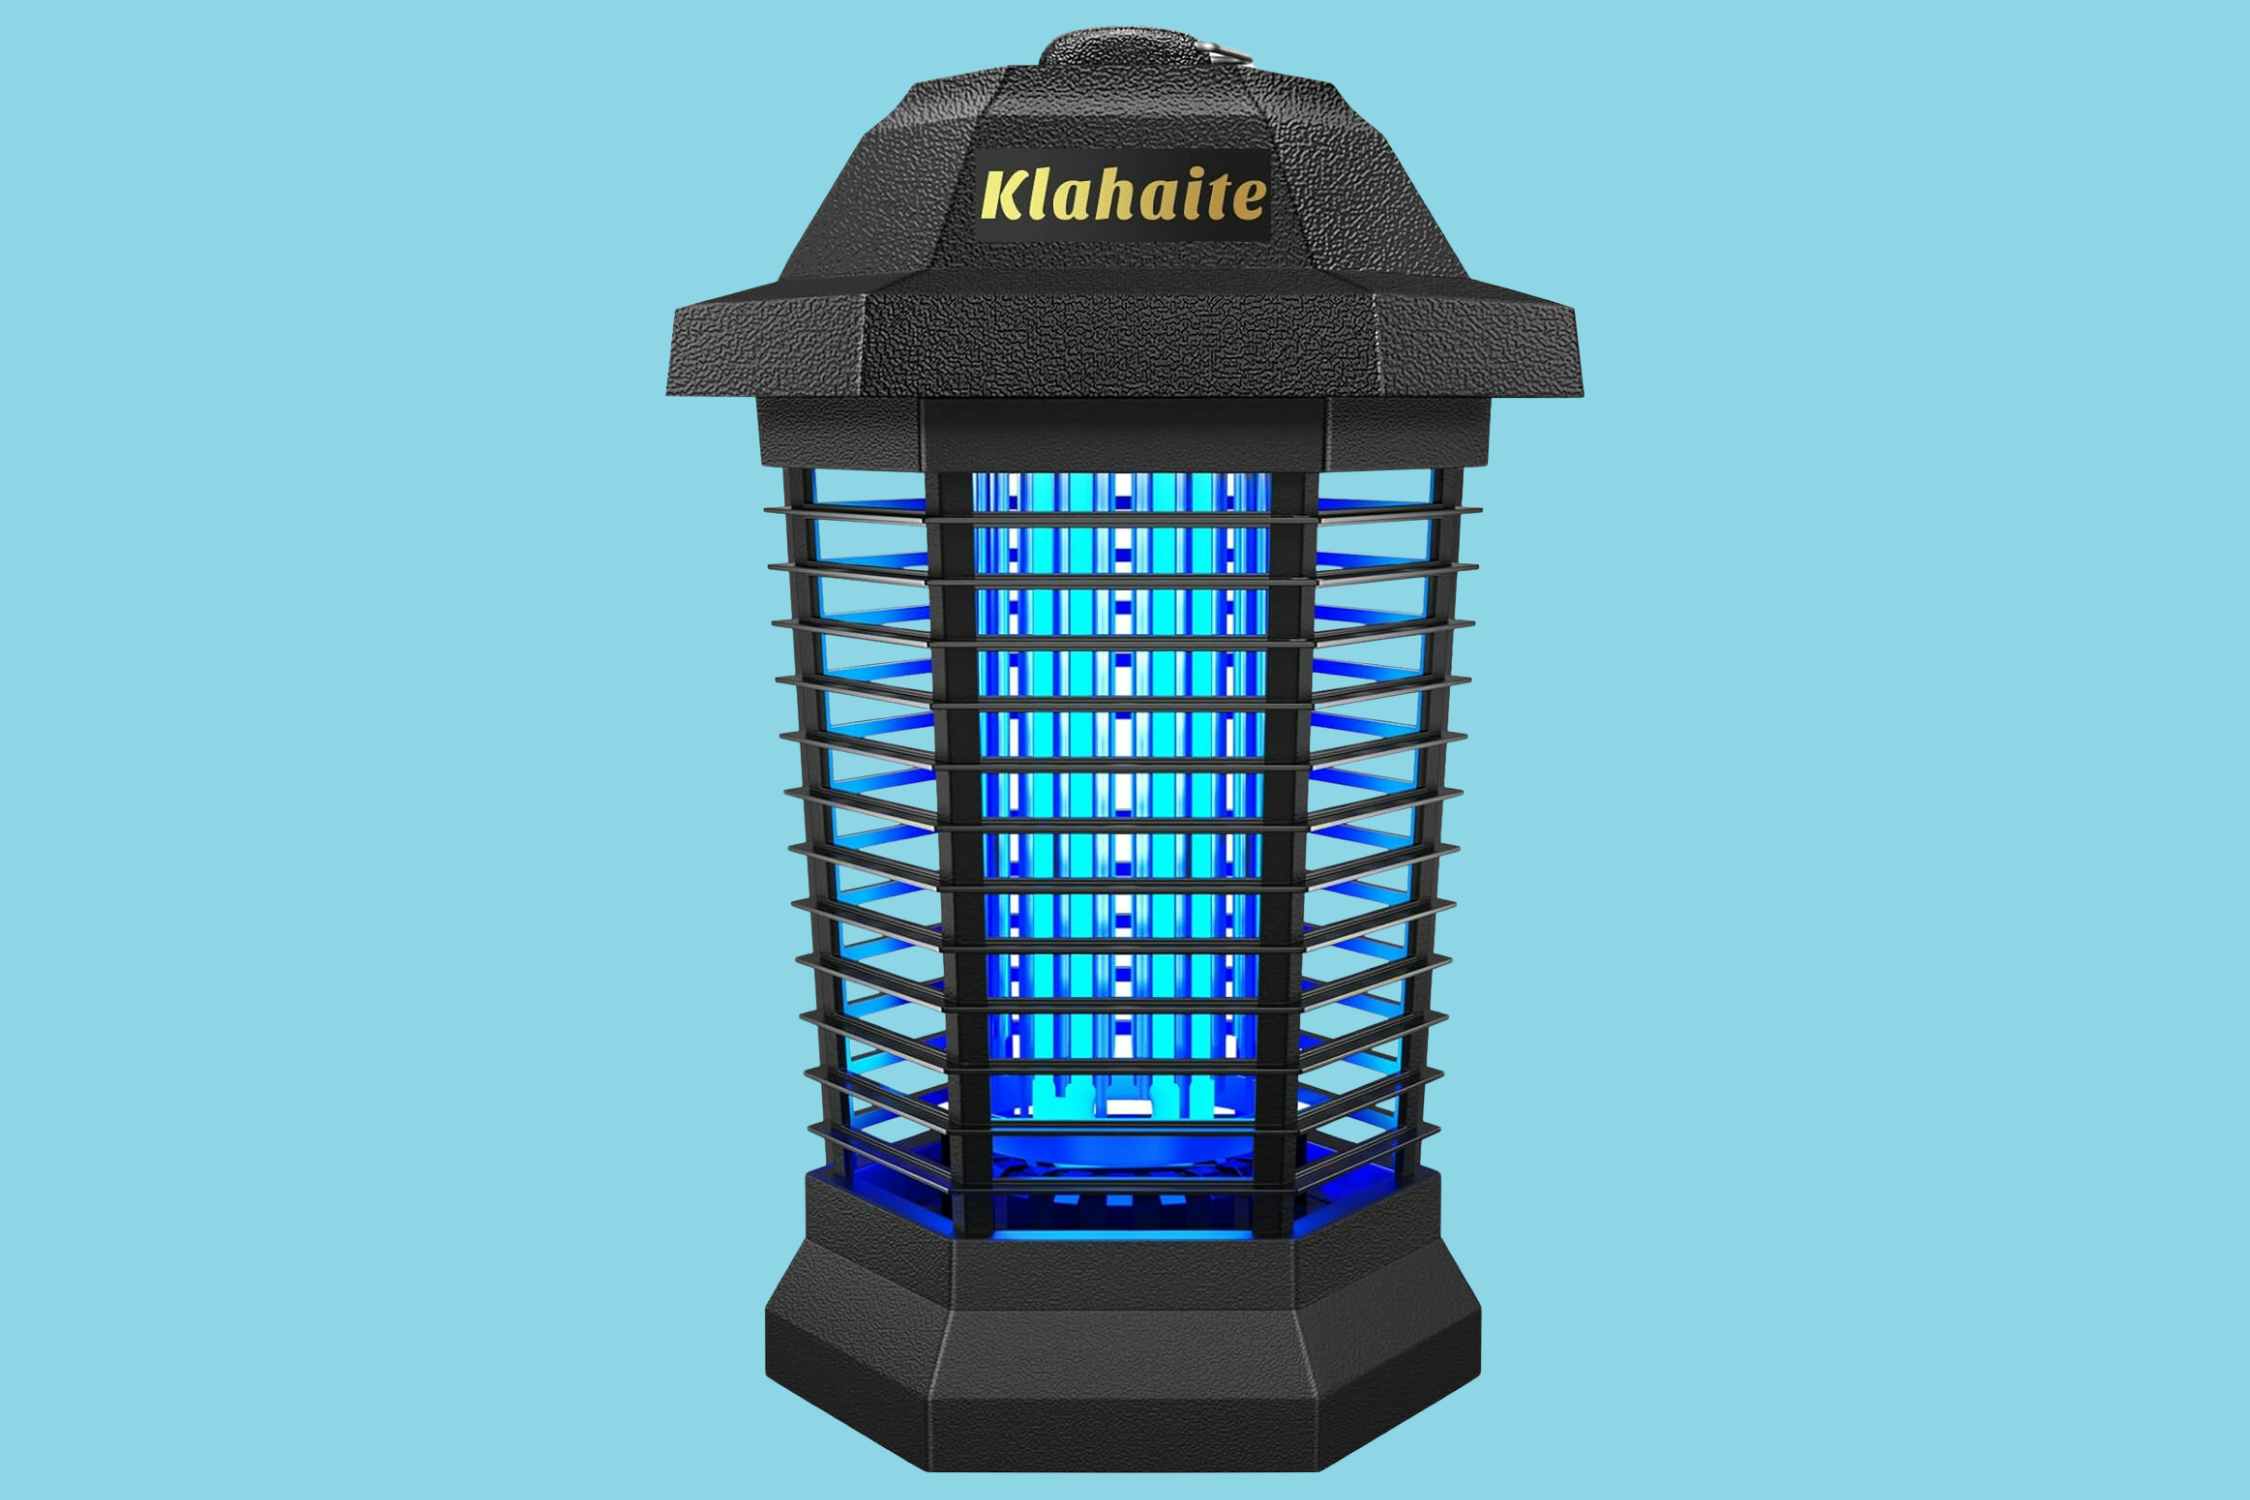 Electric Outdoor Bug Zapper, Only $19.99 With Amazon Promo Code